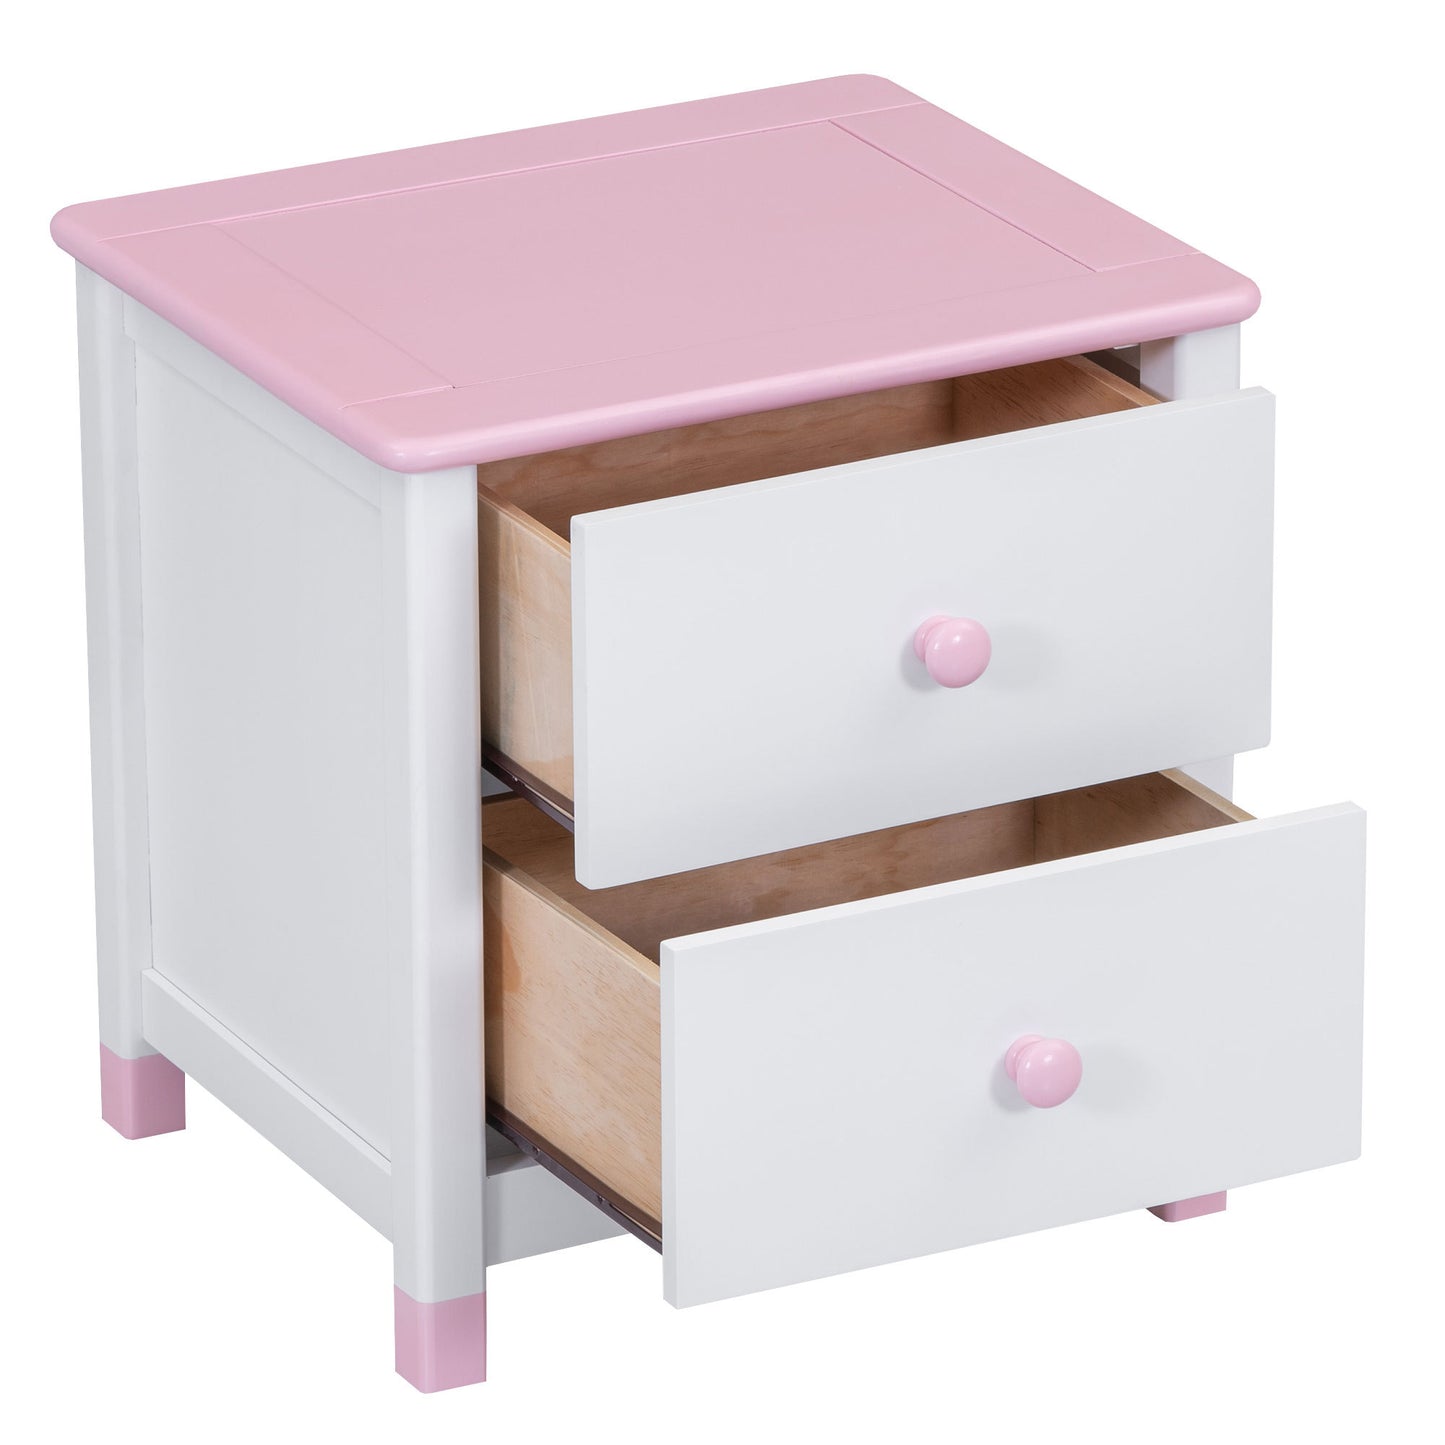 3-Pieces Bedroom Sets Twin Size Platform Bed with Nightstand and Storage dresser,White+Pink